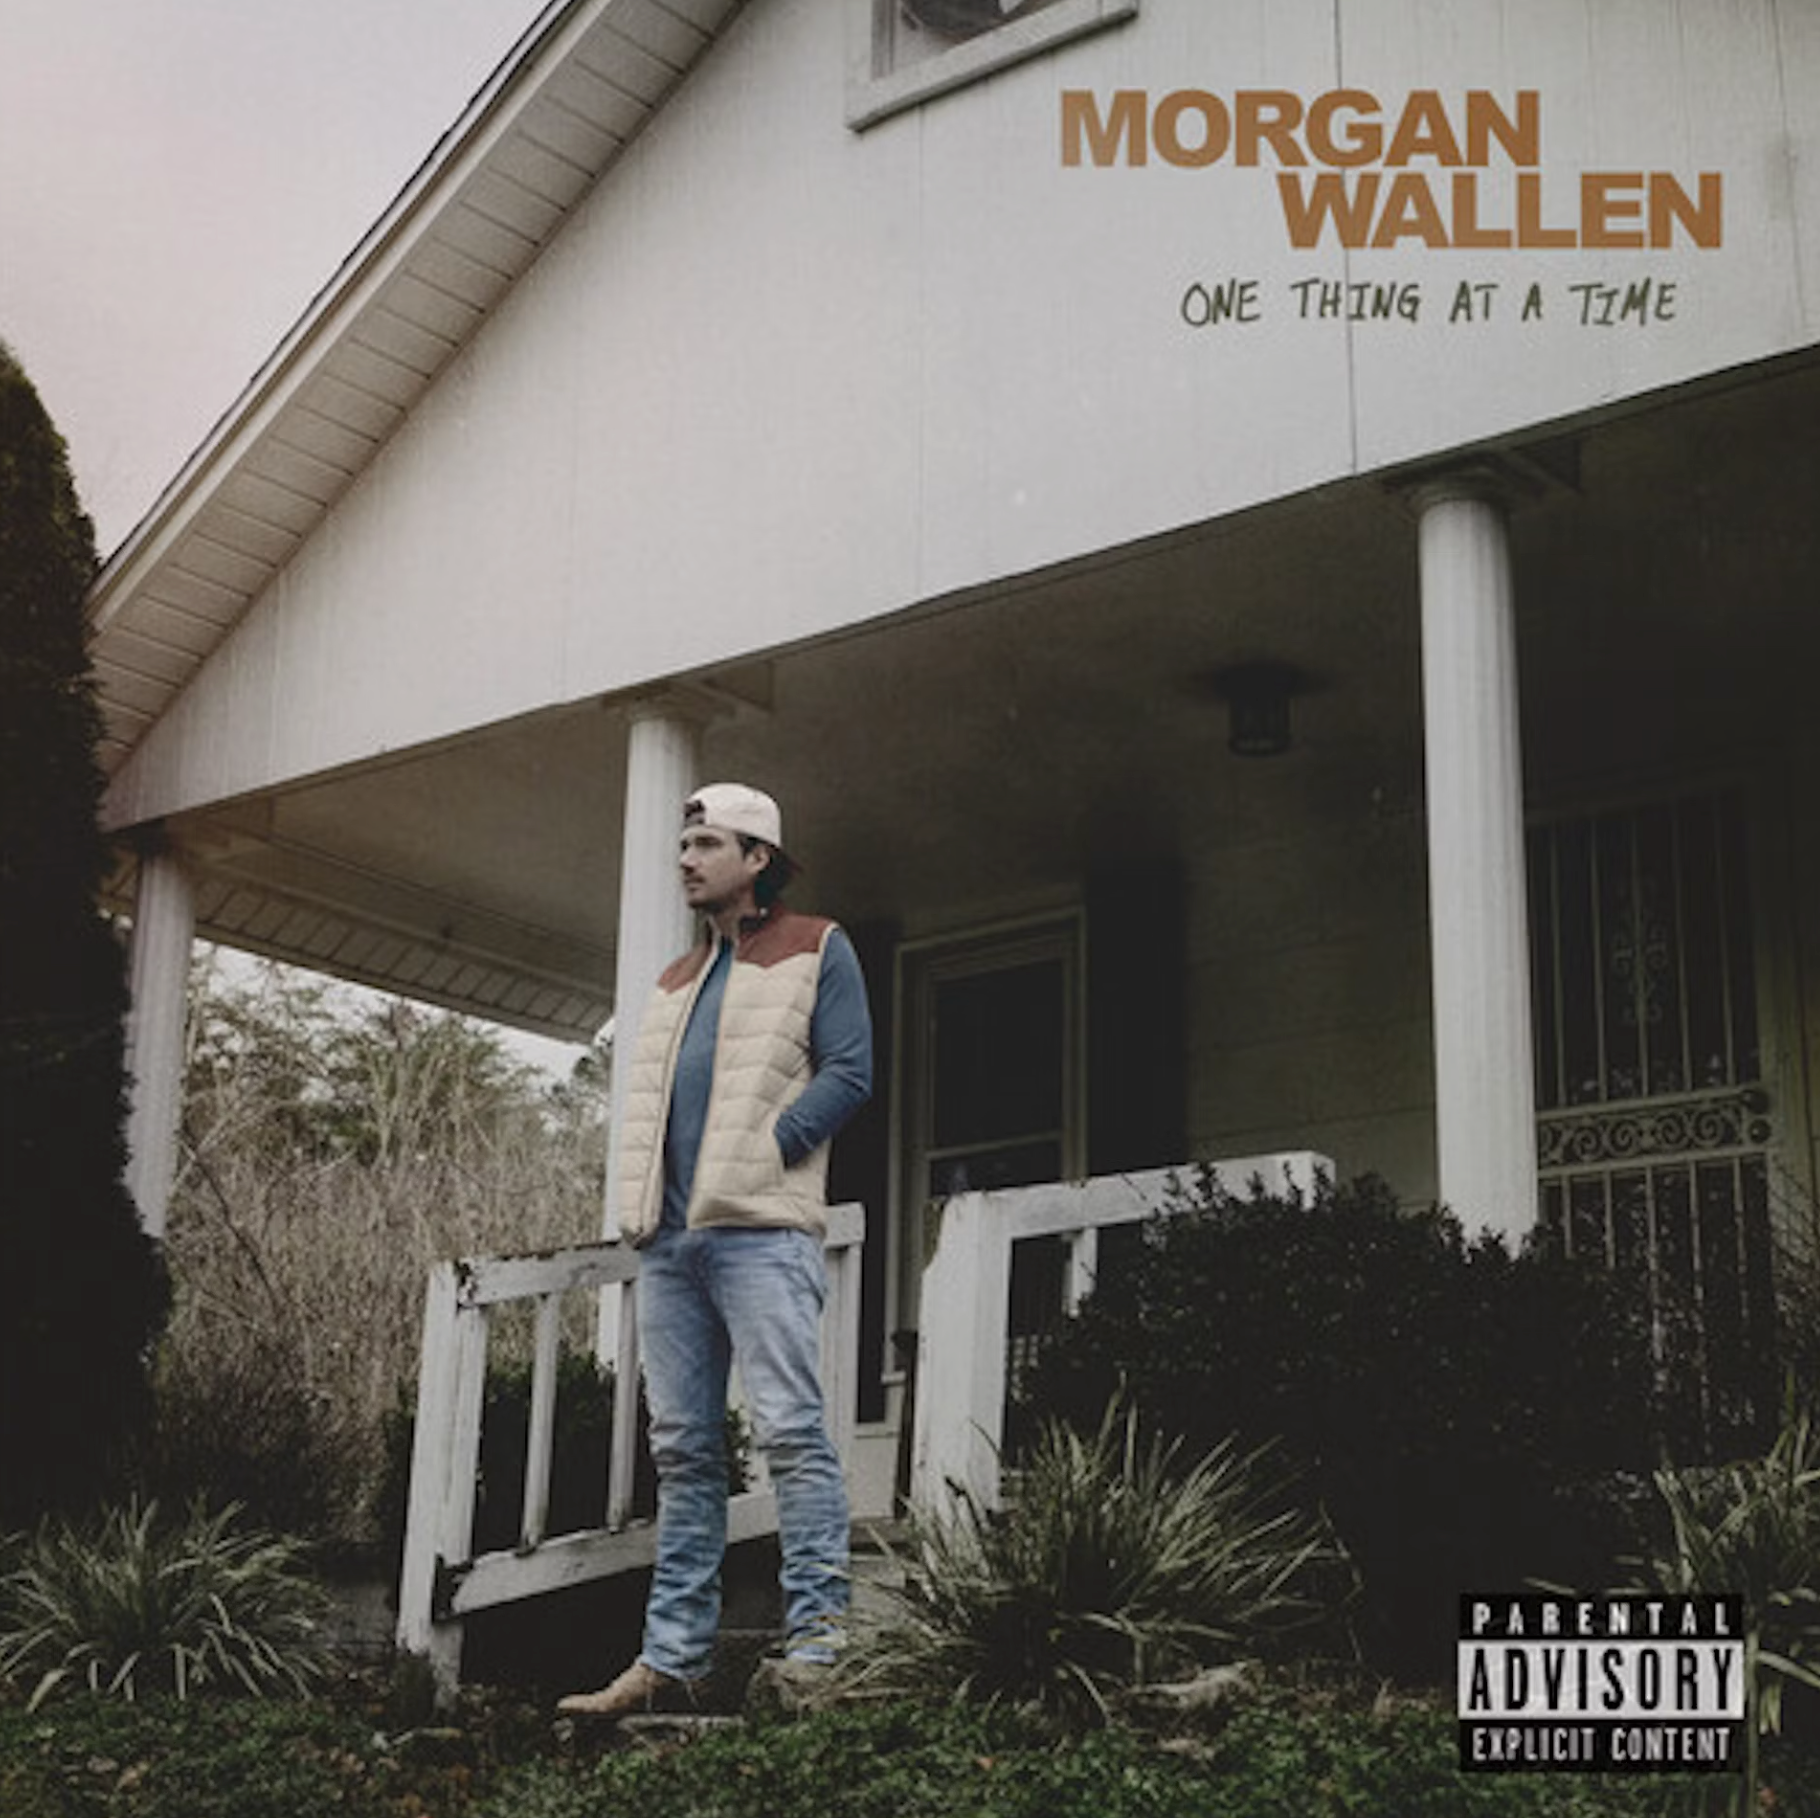 [DAMAGED] Morgan Wallen - One Thing At A Time [White Vinyl]